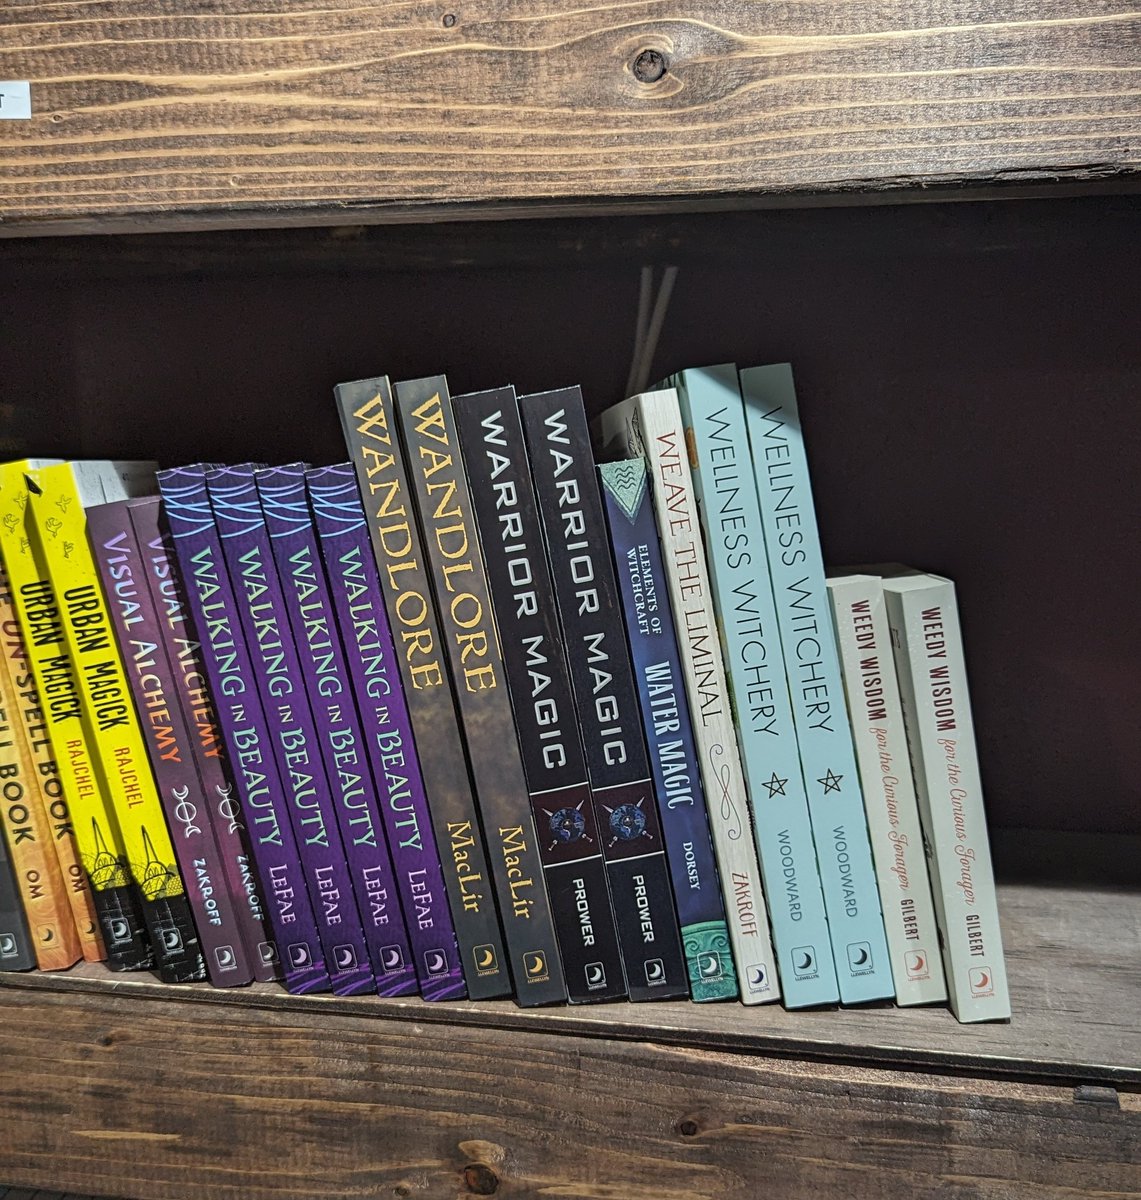 Books for Witches at EARTHBOUND METAPHYSICAL SHOPPE in Syracuse, NY. ✨ @VincentHigginb2 ✨ @MharaStarling ✨ @ladyzoe2dots ✨ @deborahblake ✨ @LTempestZ ✨ @diana_rajchel ✨ @TomasPrower ✨ @LilithDorsey ✨ @LlewellynBooks ✨ #Witchcraft #Books